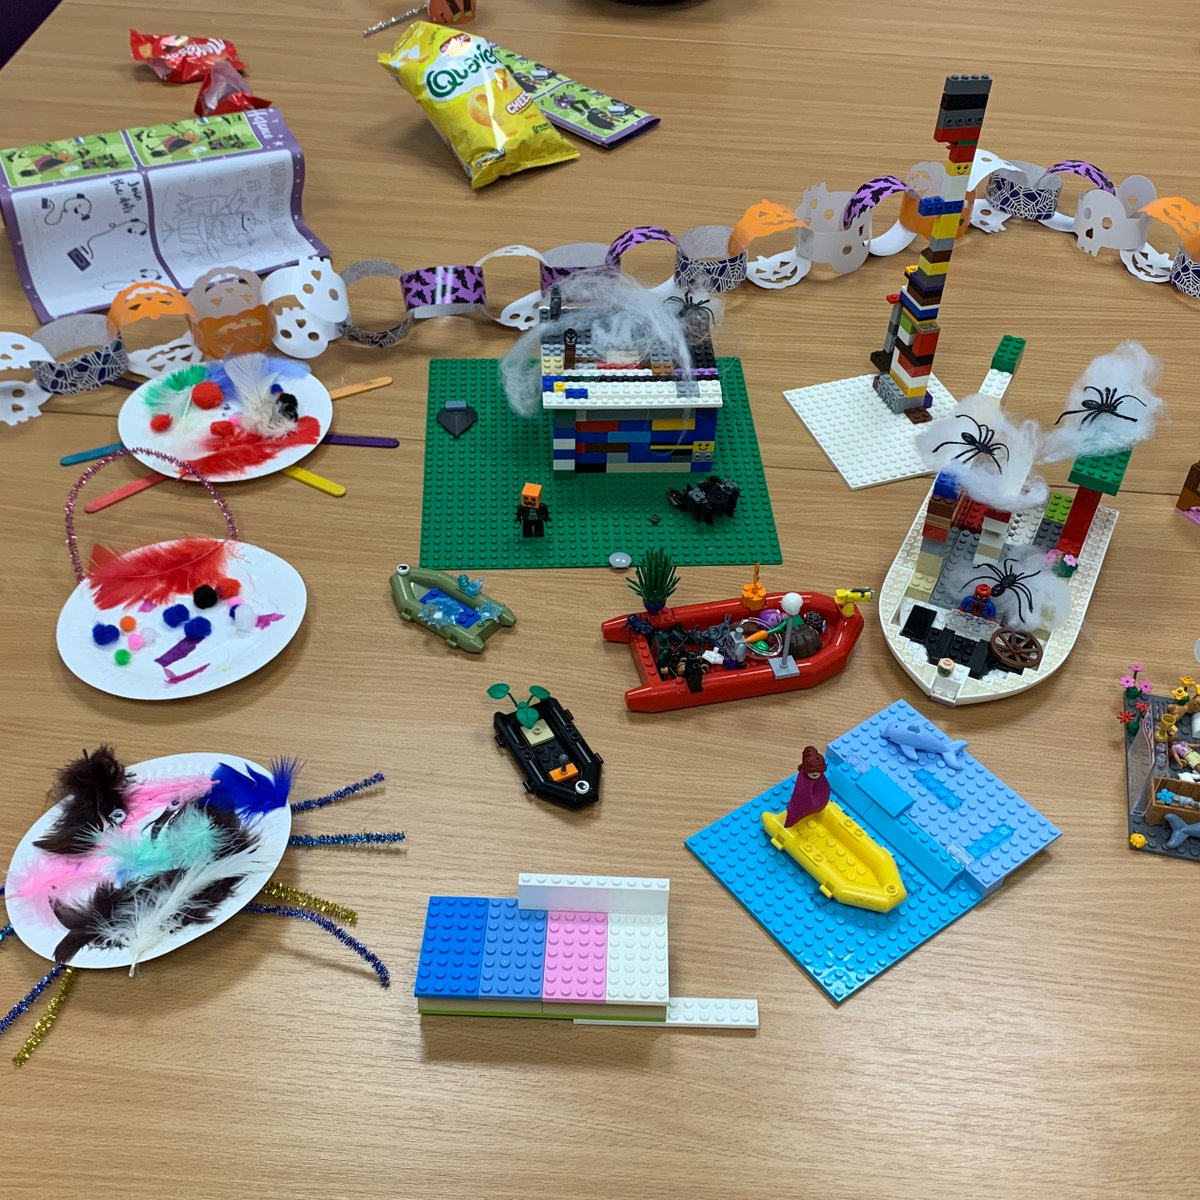 Half term was filled with spooky fun as we invited children and young people to our Lancaster office to take part in a Halloween-themed Lego event 🎃 Creativity and snacks were plenty, and we hope everyone had a great day! Now to start planning some festive events 🎄